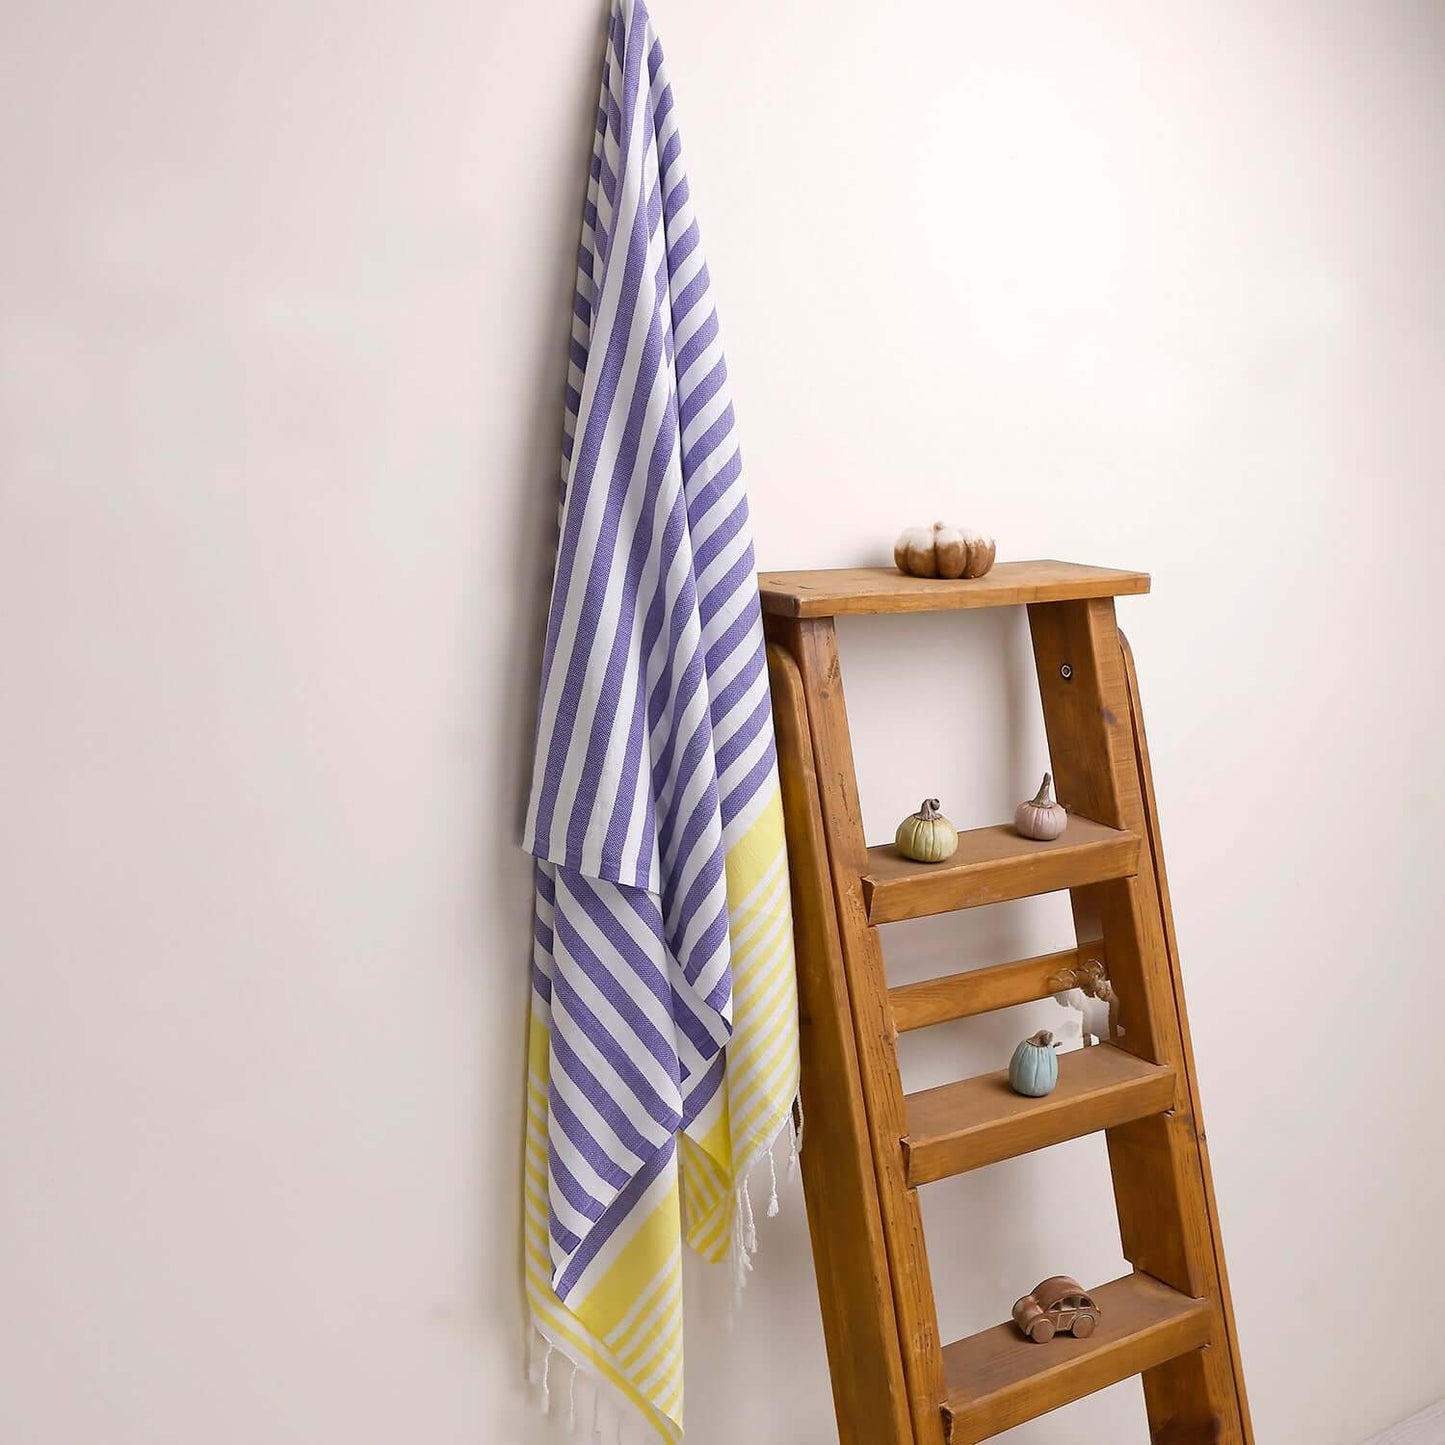 Loom Legacy purple and yellow striped beach towel with tassels, draped over a wooden ladder beside small decorative items on the shelves.